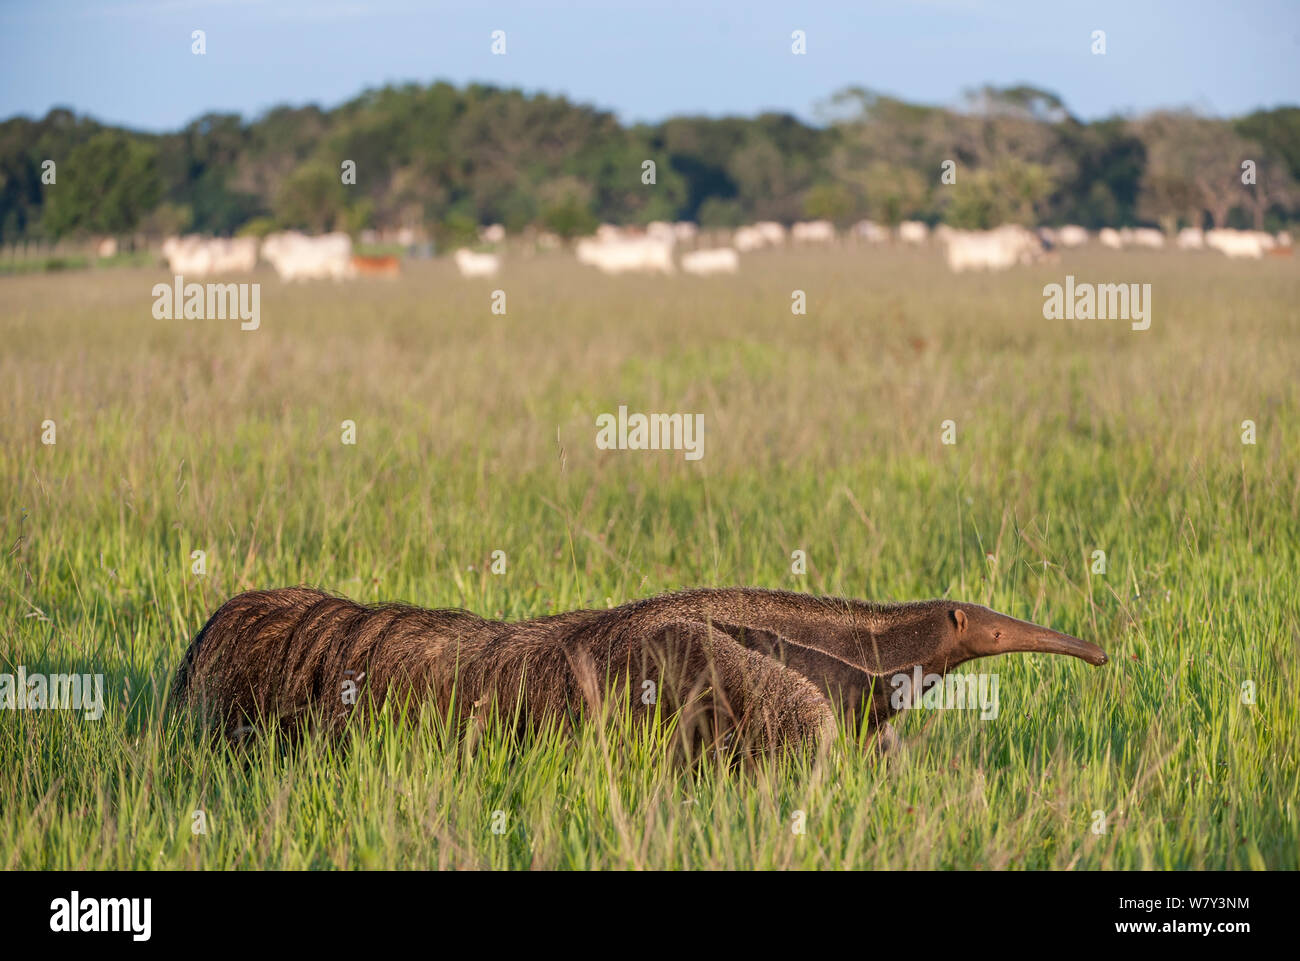 Adult Giant Anteater (Myrmecophaga tridactyla) walking across savannah with Zebu Cattle (Bos primigenius indicus) grazing in background. Near Unamas Private Reserve, Los Llanos, Colombia, South America. Stock Photo